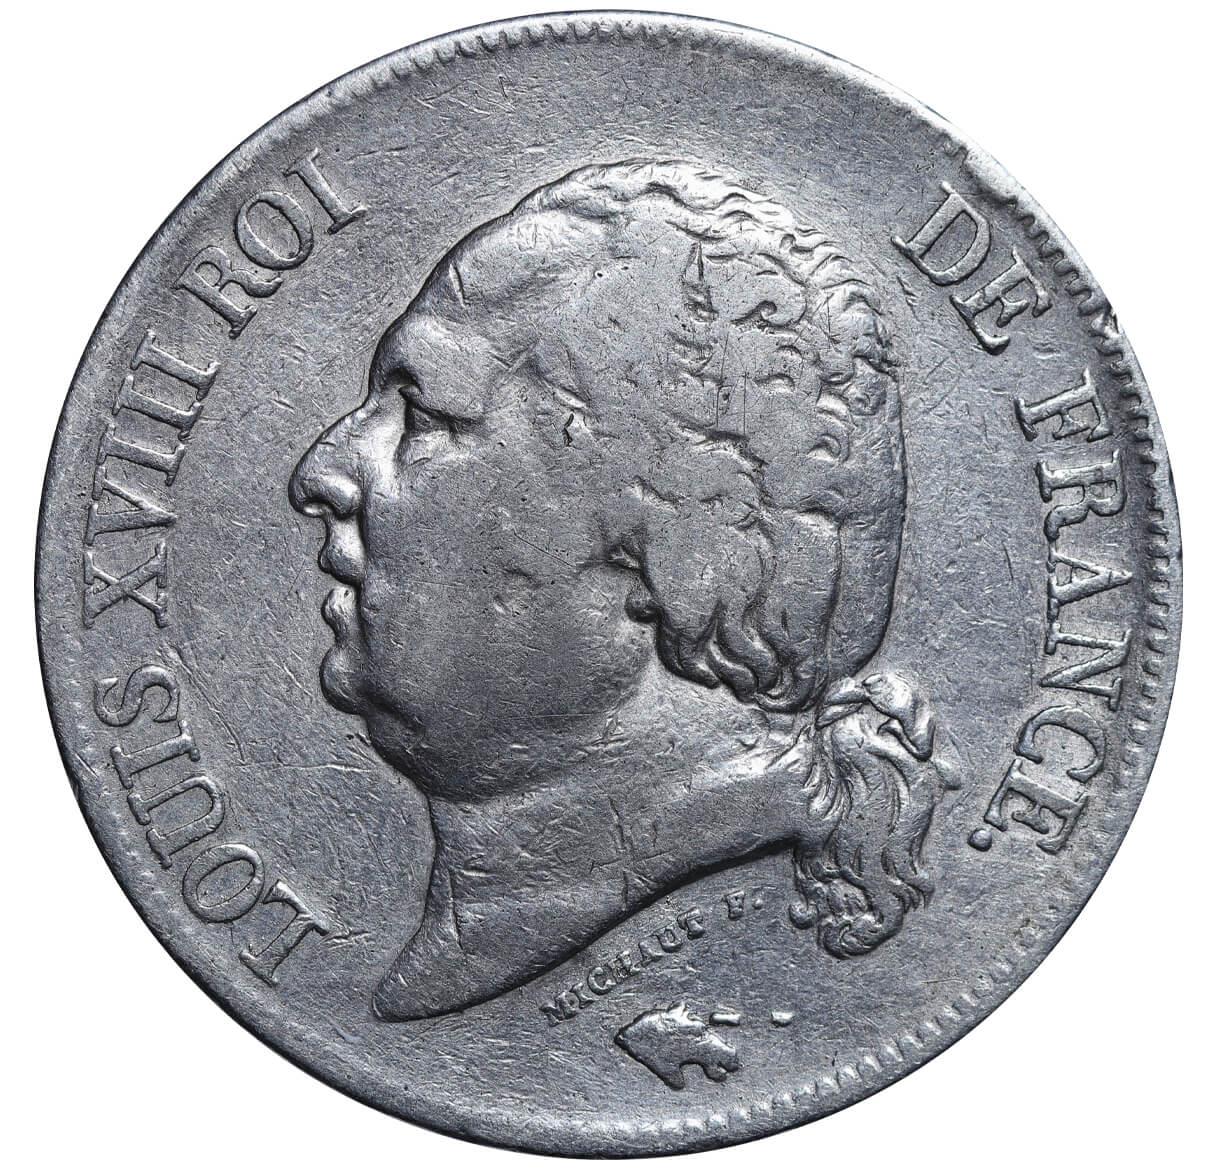 France, 5 Francs, 1824 year, A - Image 2 of 3